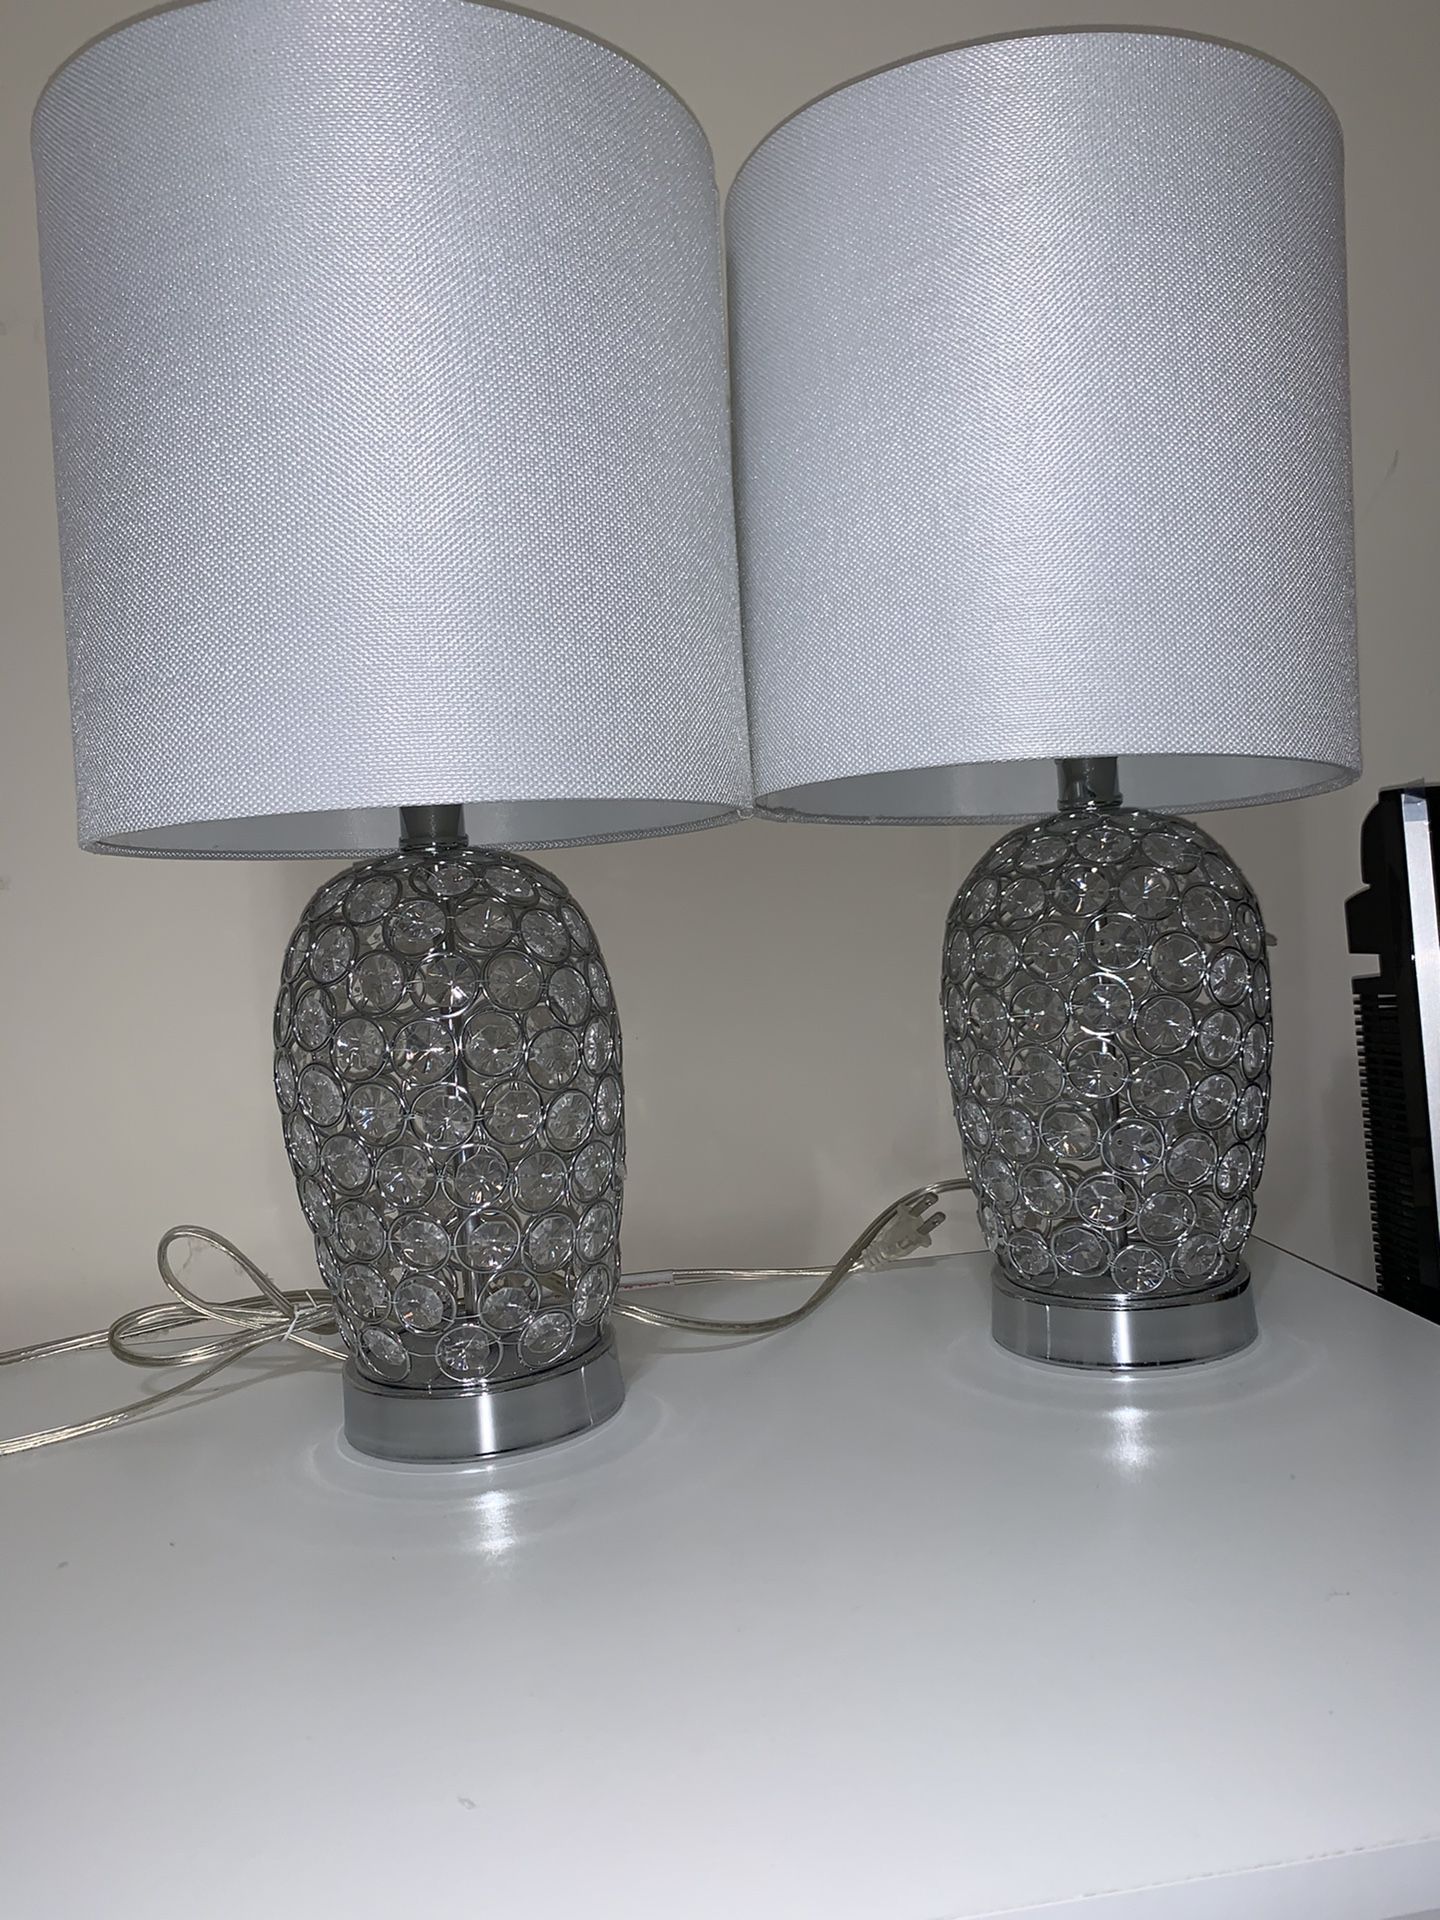 Two beautiful side table lamps!!!!- Serious Inquiry’s Only!!